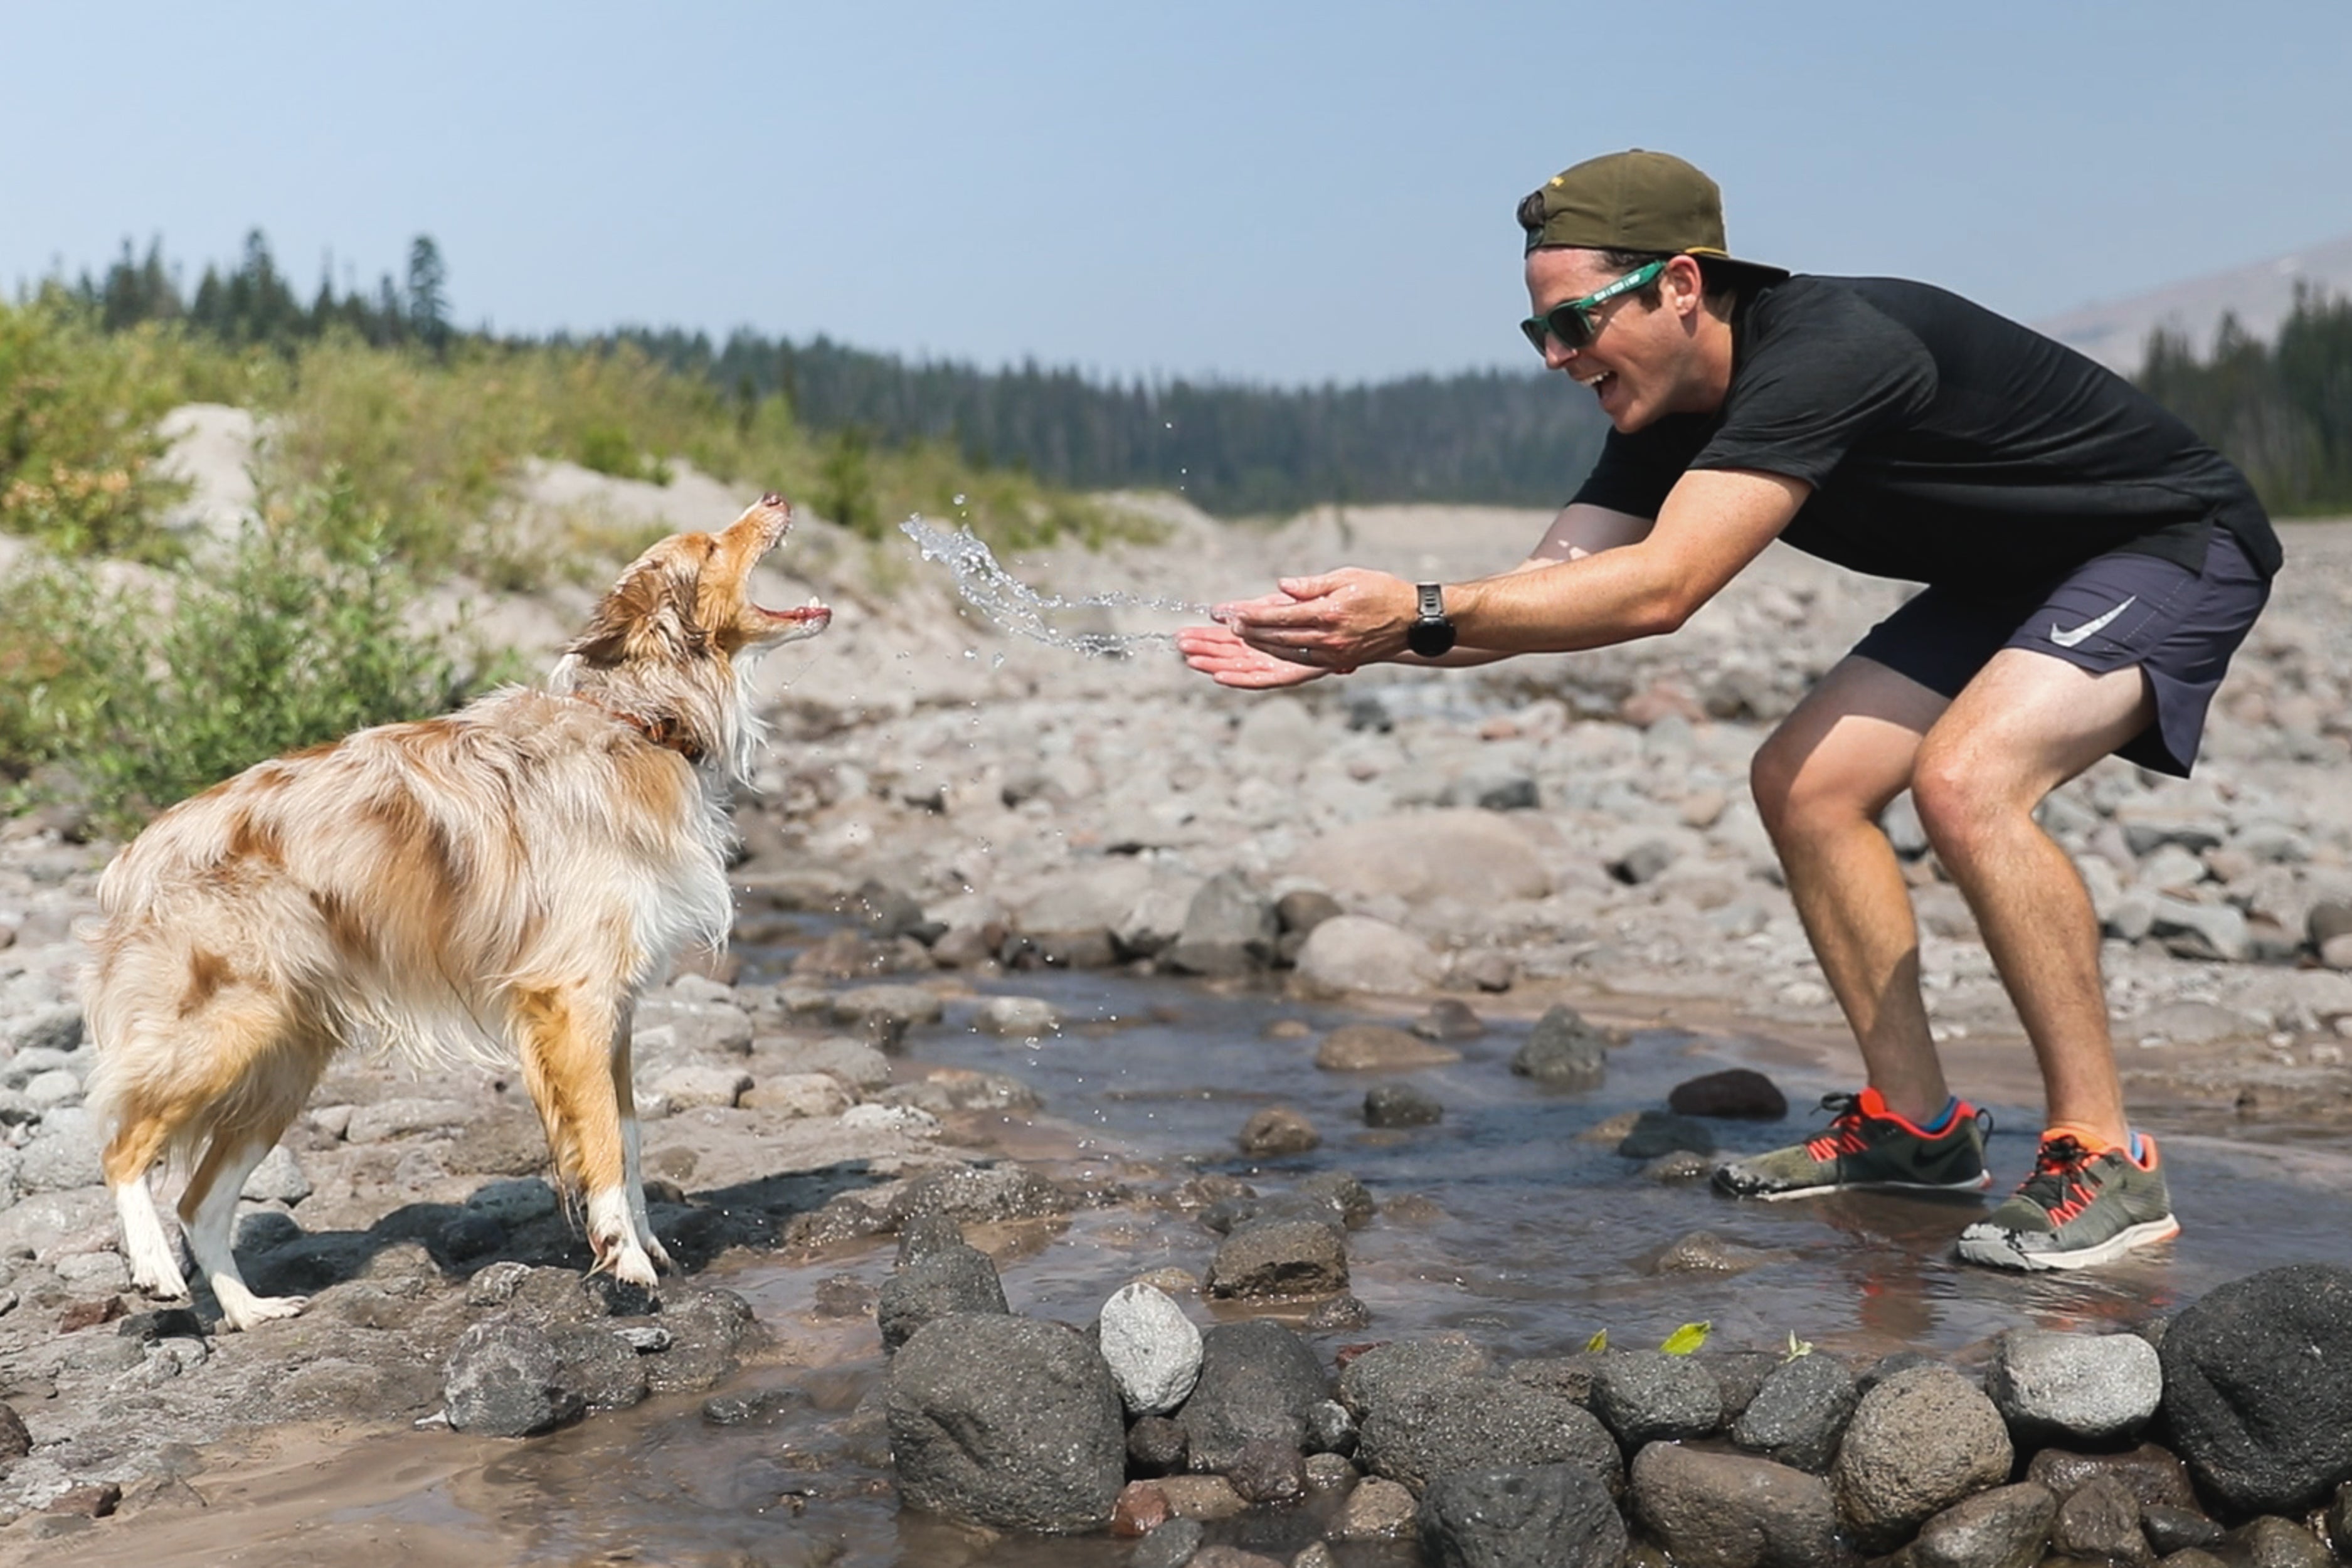 Chad throws water to dog Mason from a rocky river bed at Mt hood.